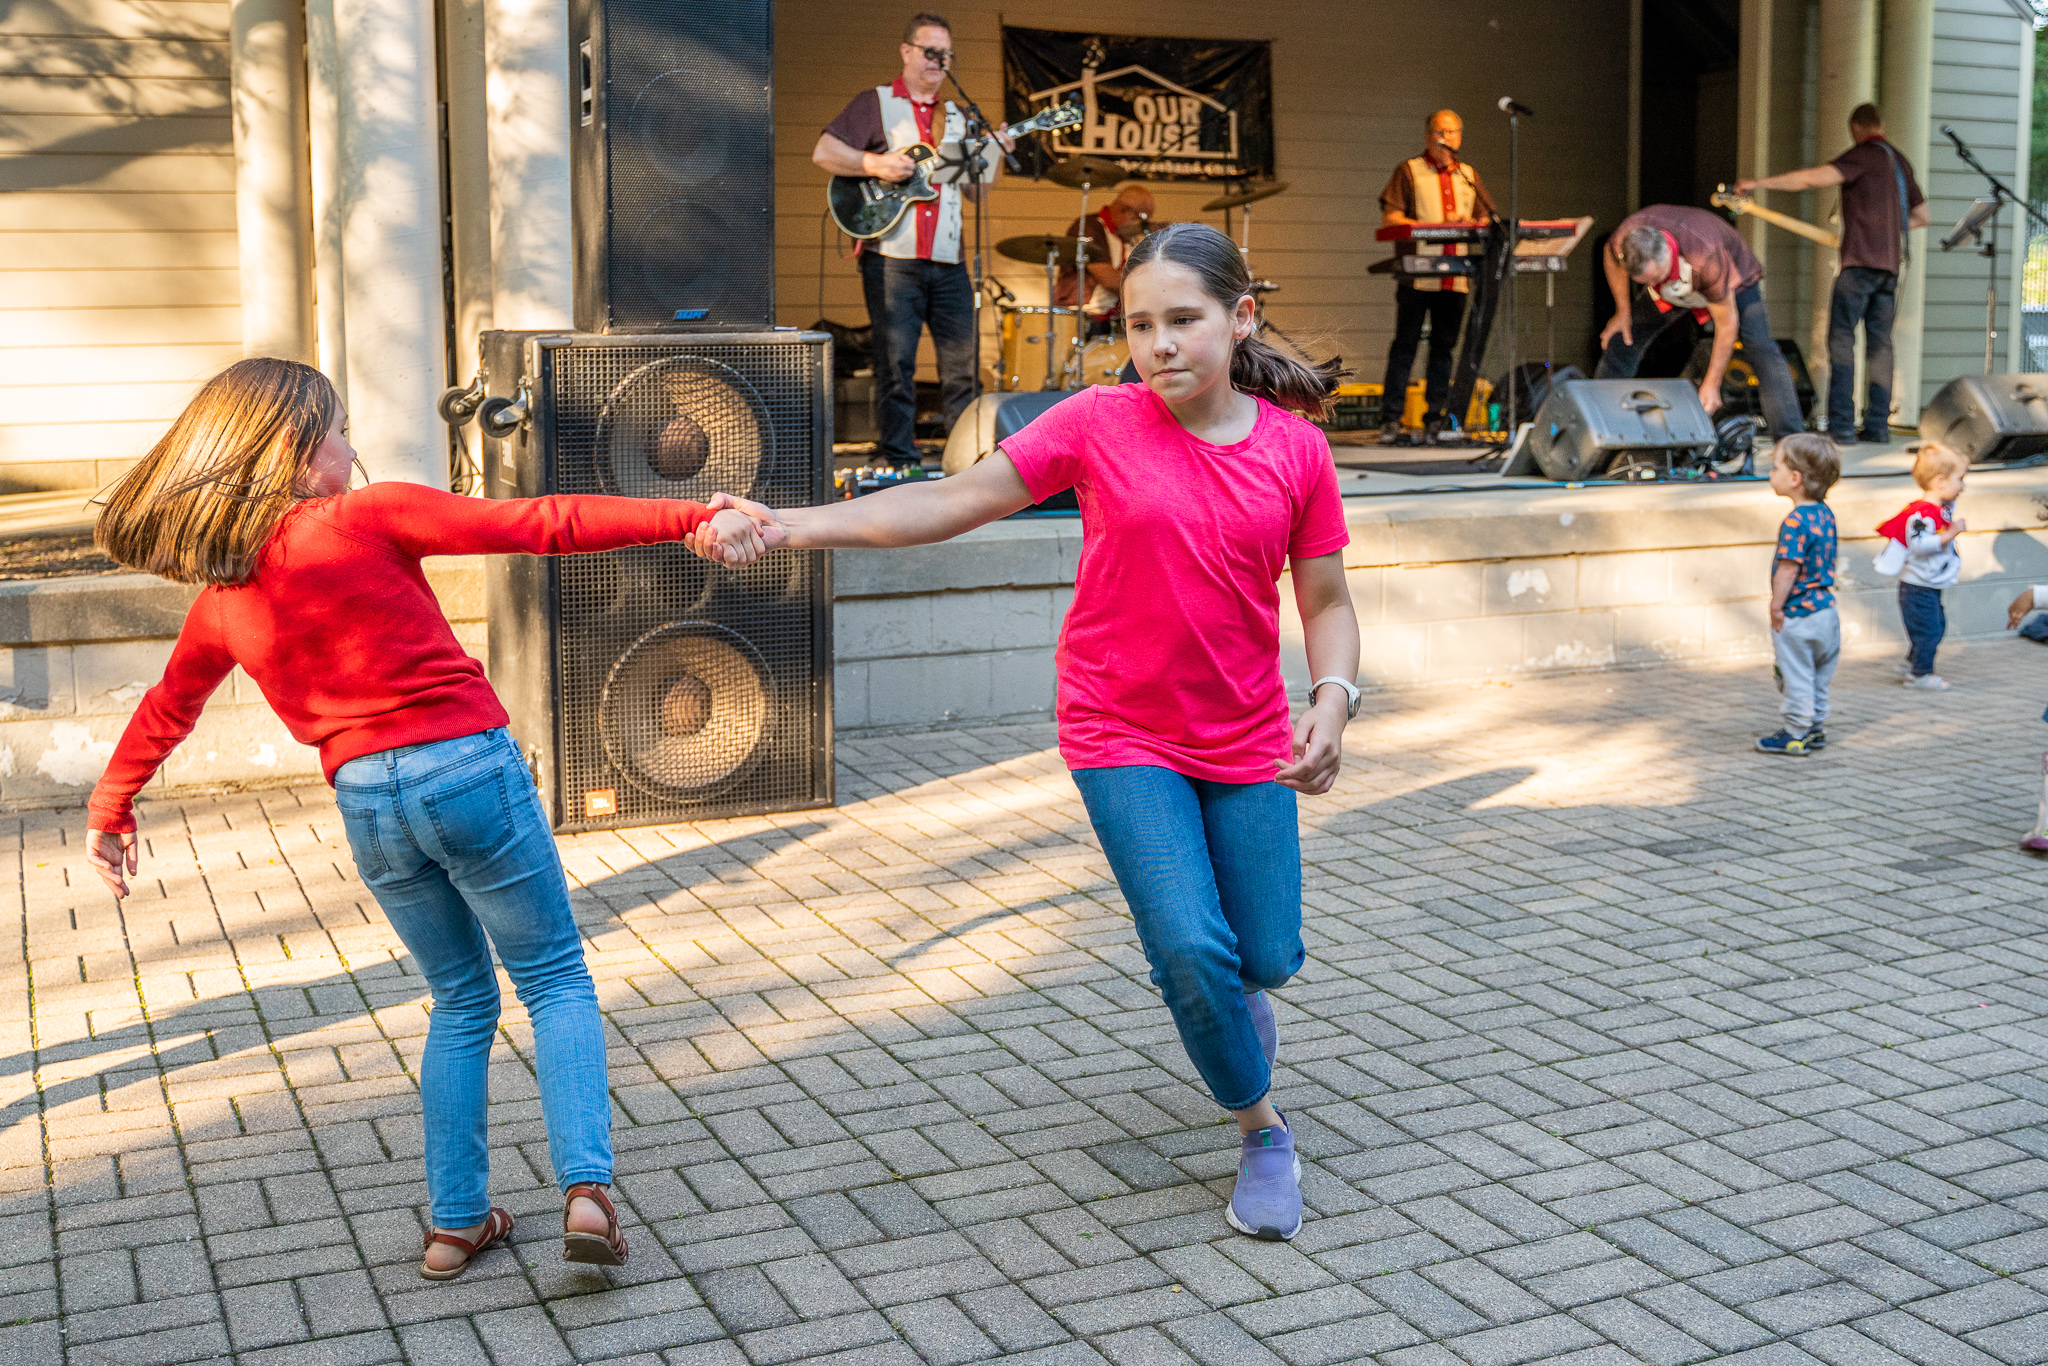 Music and dancing at Nights in June